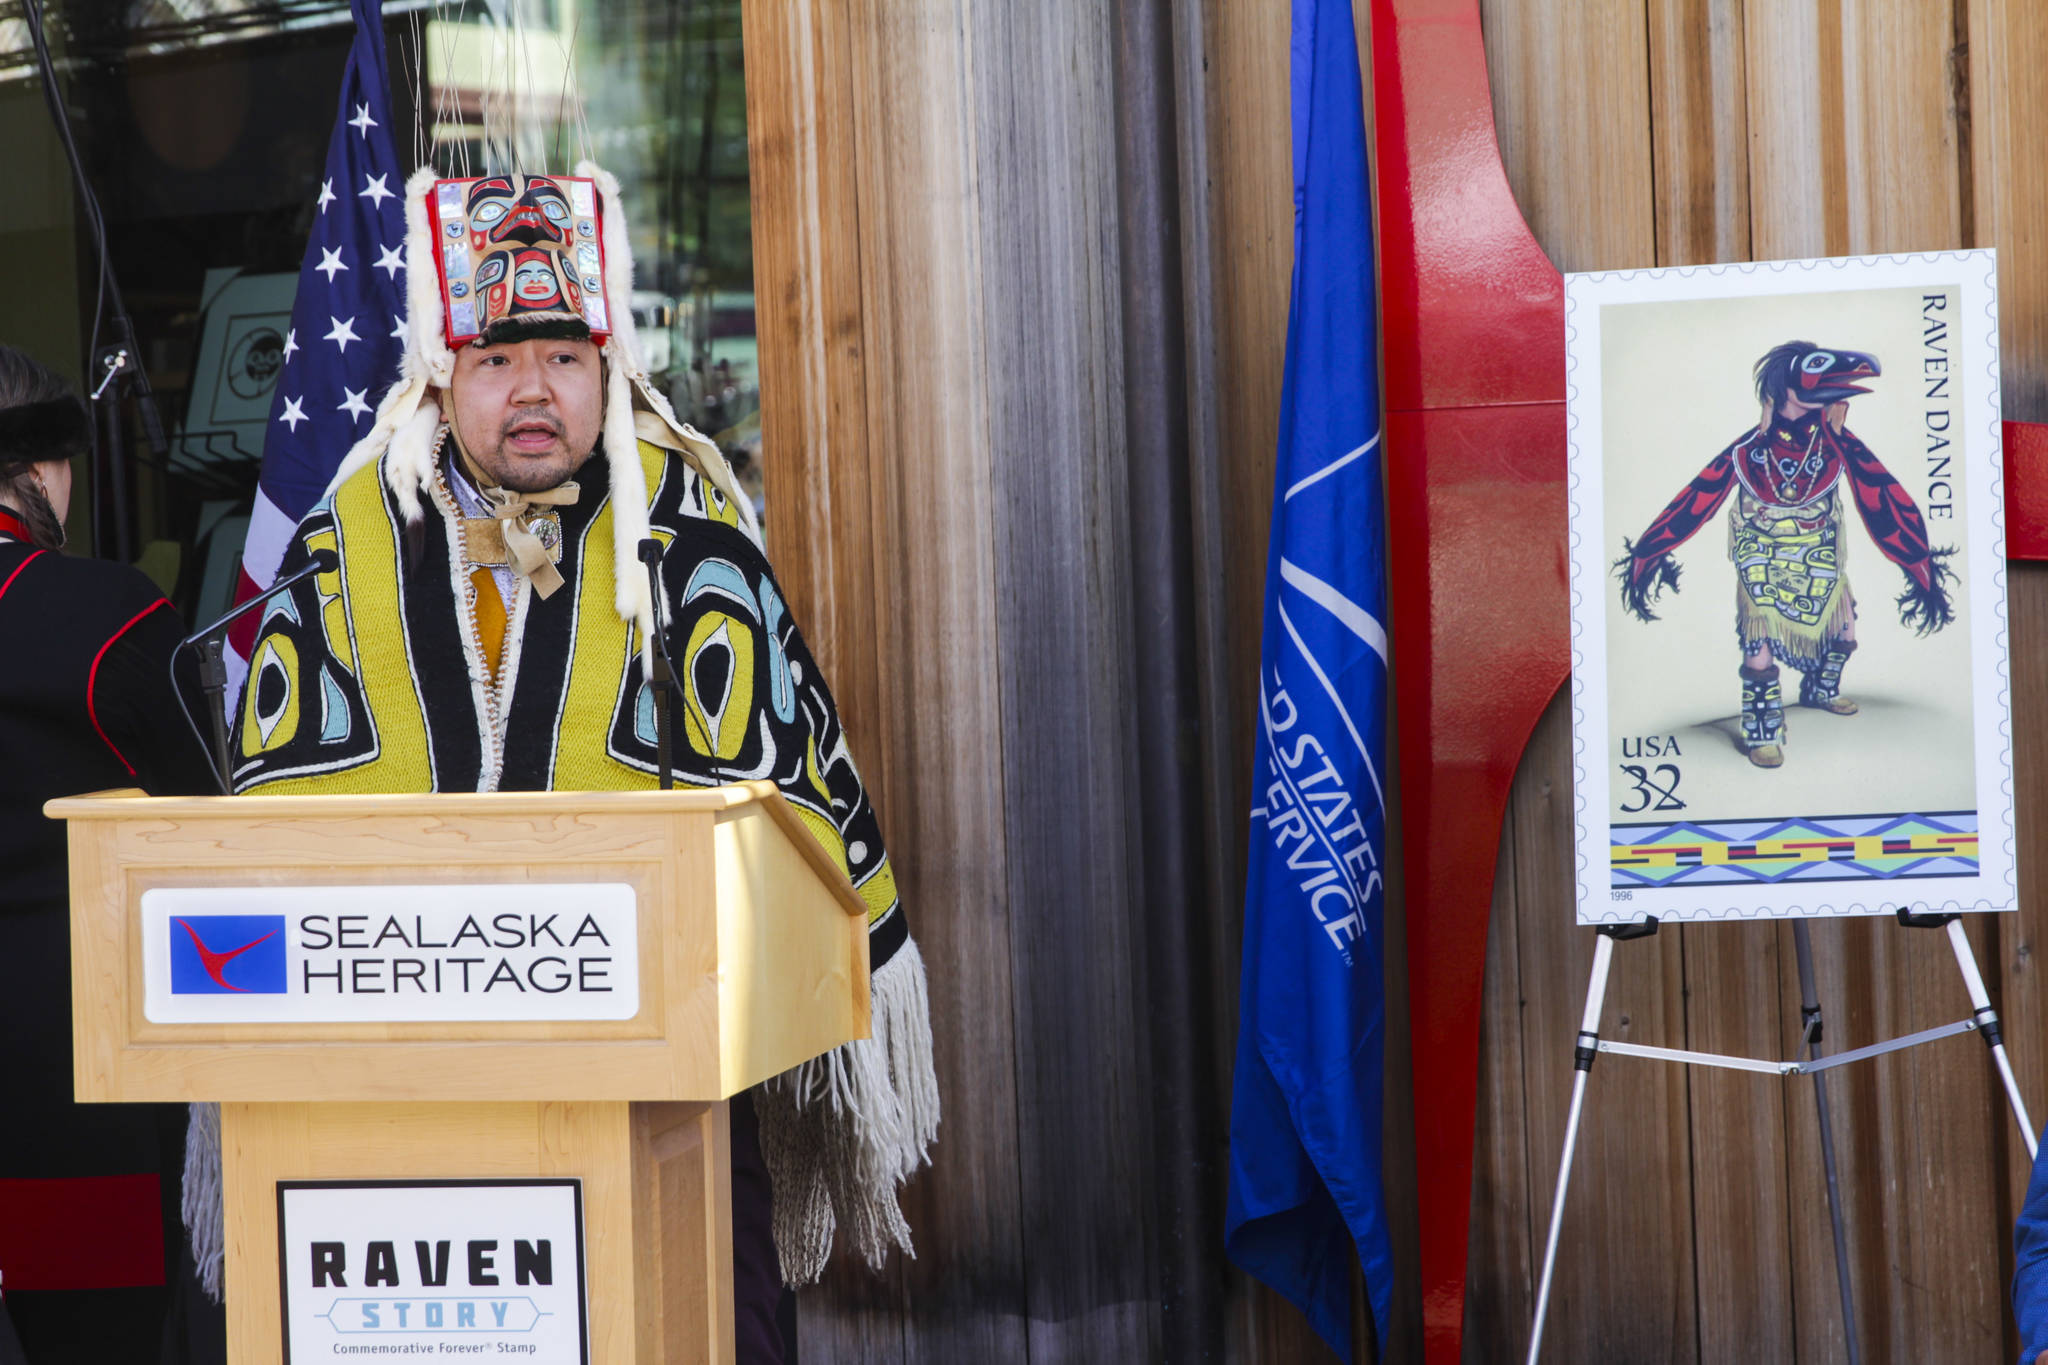 Rico Lanáat’ Worl, artist of the Raven Story stamp, which is according to SHI the first Tlingit design featured on a stamp, speaks to the crowd at the official release ceremony in front of the Sealaska Heritage Institute’s Walter Soboleff Building on Friday, July 30, 2021. (Michael S. Lockett / Juneau Empire)